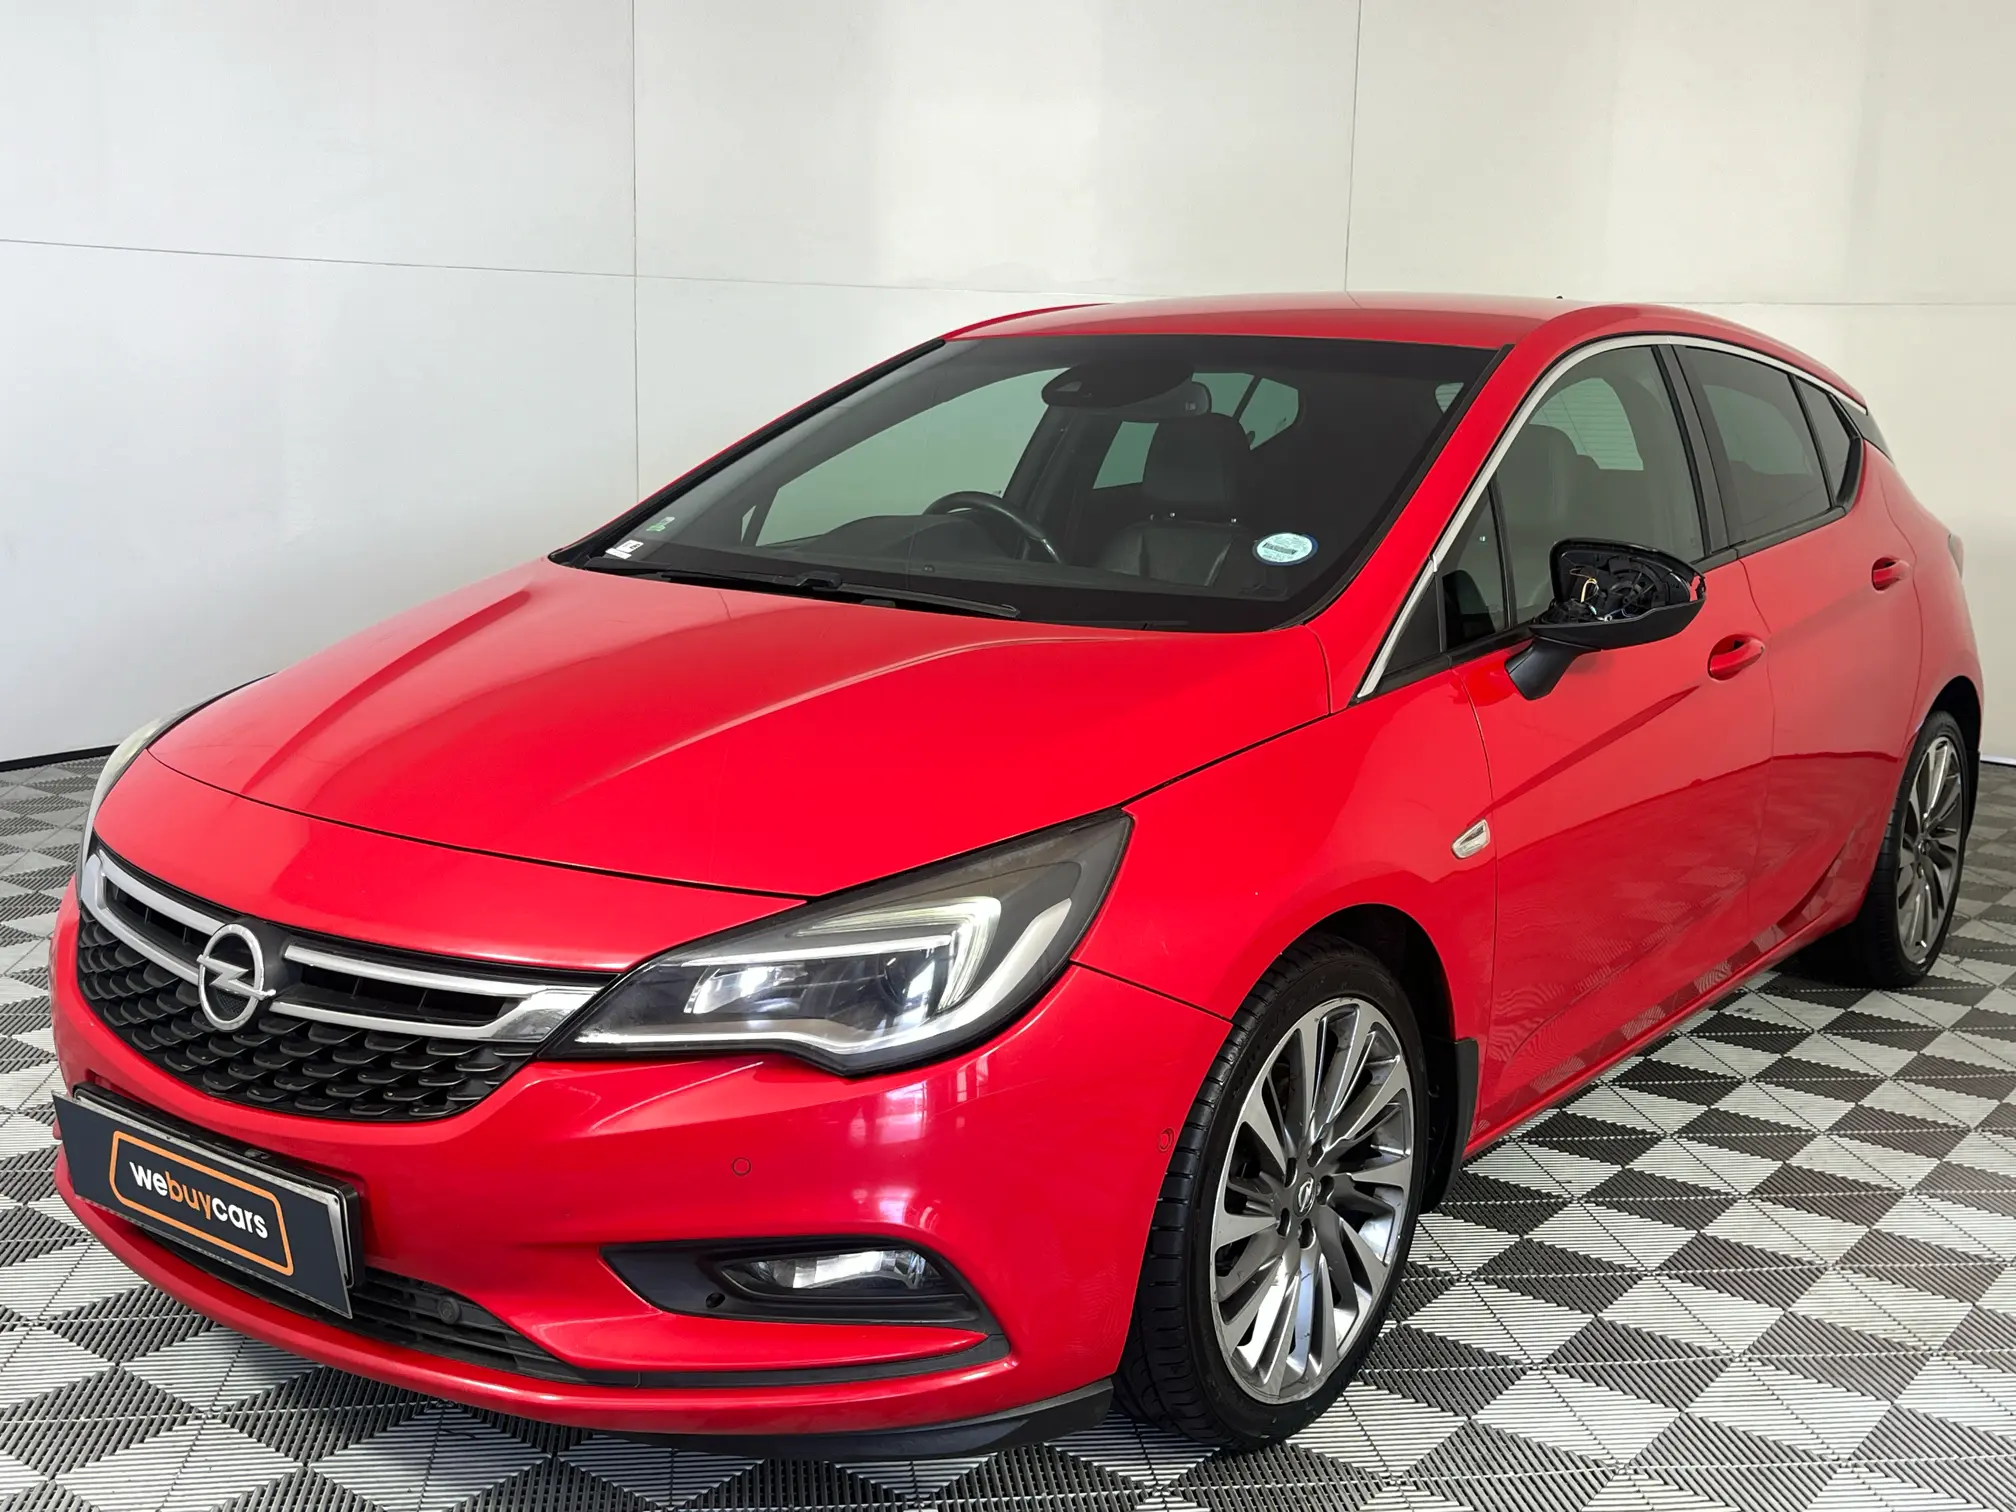 2016 Opel Astra 1.6T Sport (5dr)